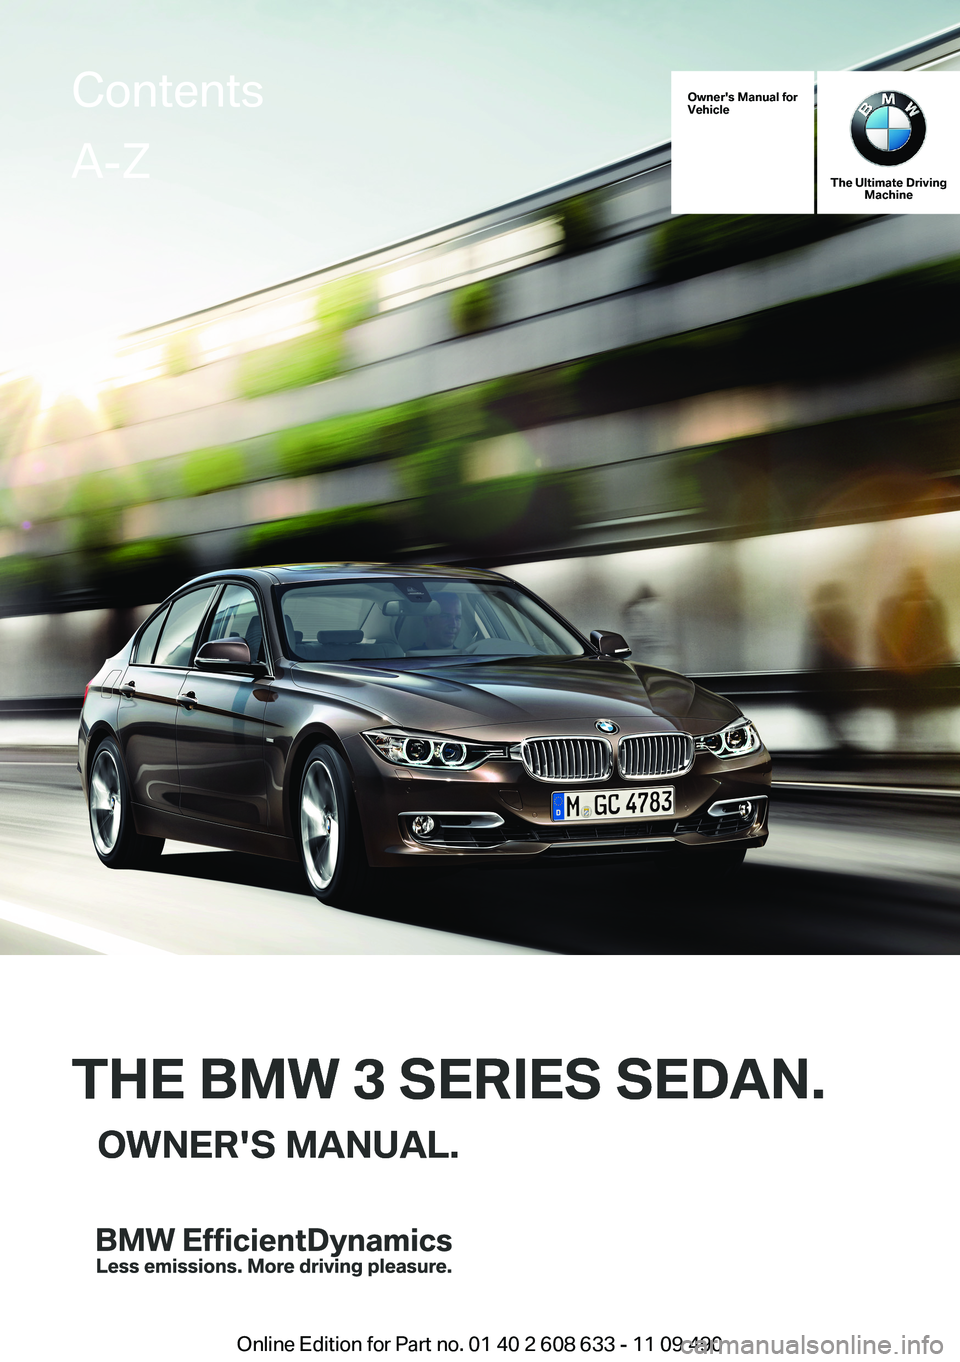 BMW 328I SEDAN 2012  Owners Manual Owner's Manual forVehicle
THE BMW 3 SERIES SEDAN.OWNER'S MANUAL.
The Ultimate DrivingMachine
THE BMW 3 SERIES SEDAN.OWNER'S MANUAL.
ContentsA-Z
Online Edition for Part no. 01 40 2 608 633 